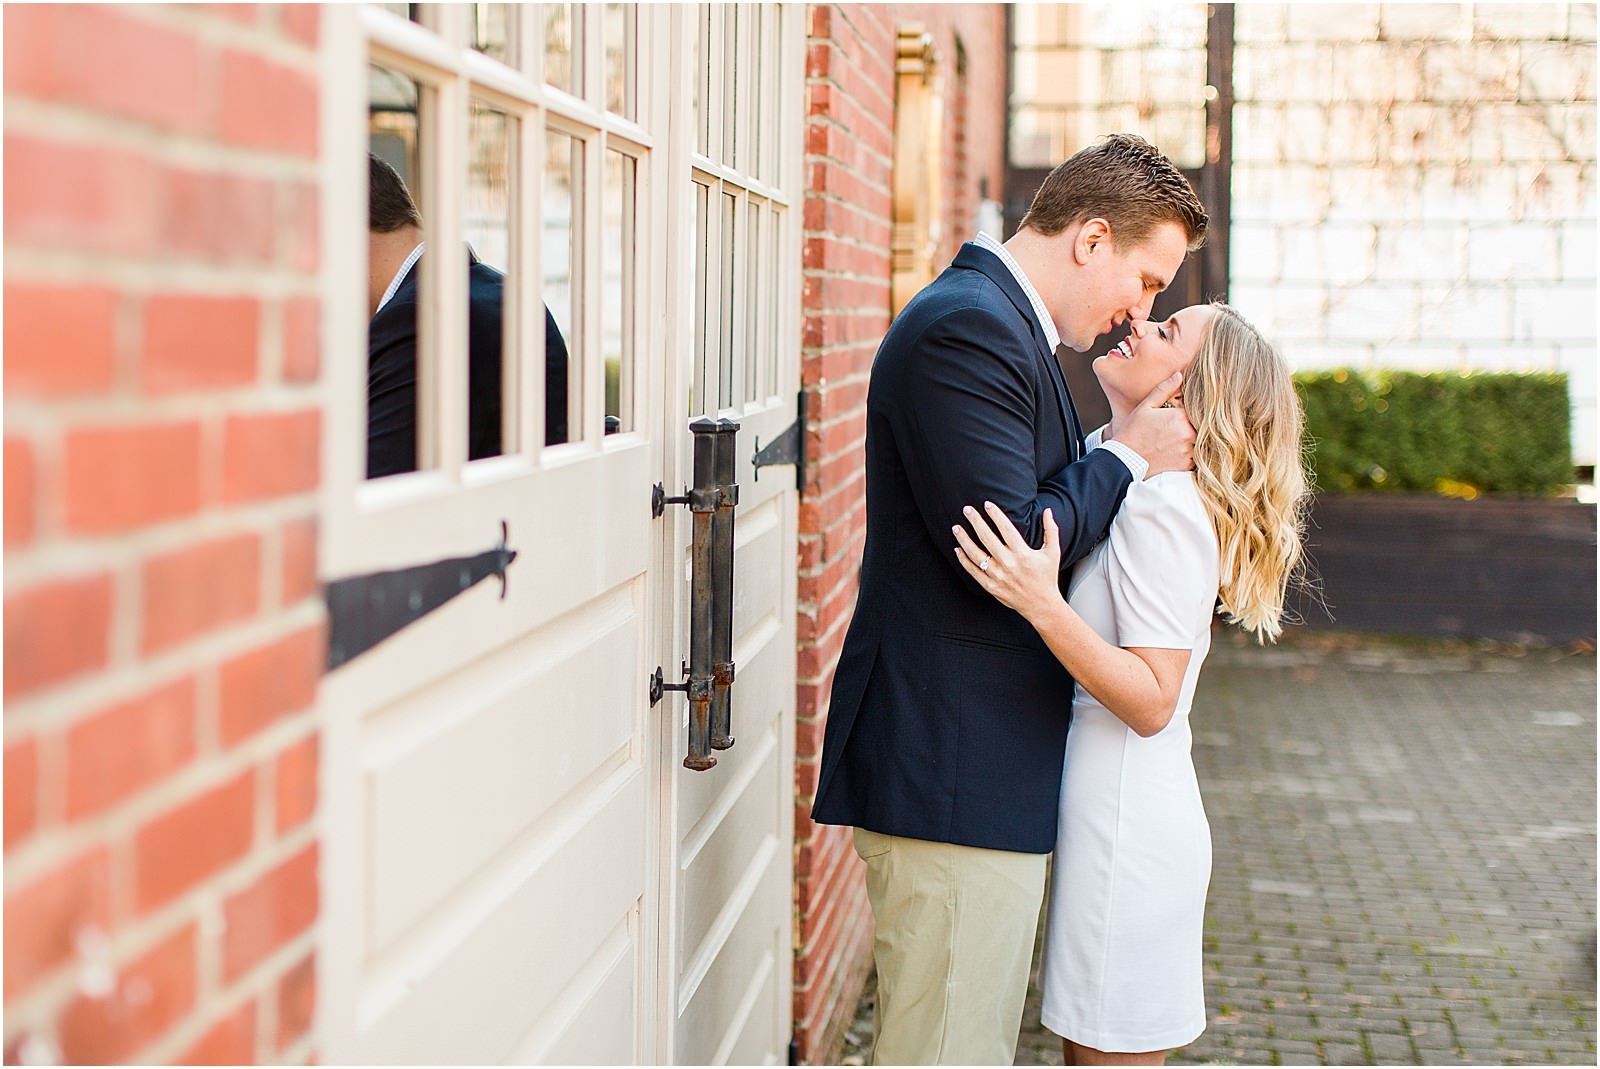 Madison and Christaan | A 20 West Engagement Session in Downto wn Newburgh | Bret and Brandie Photography012.jpg